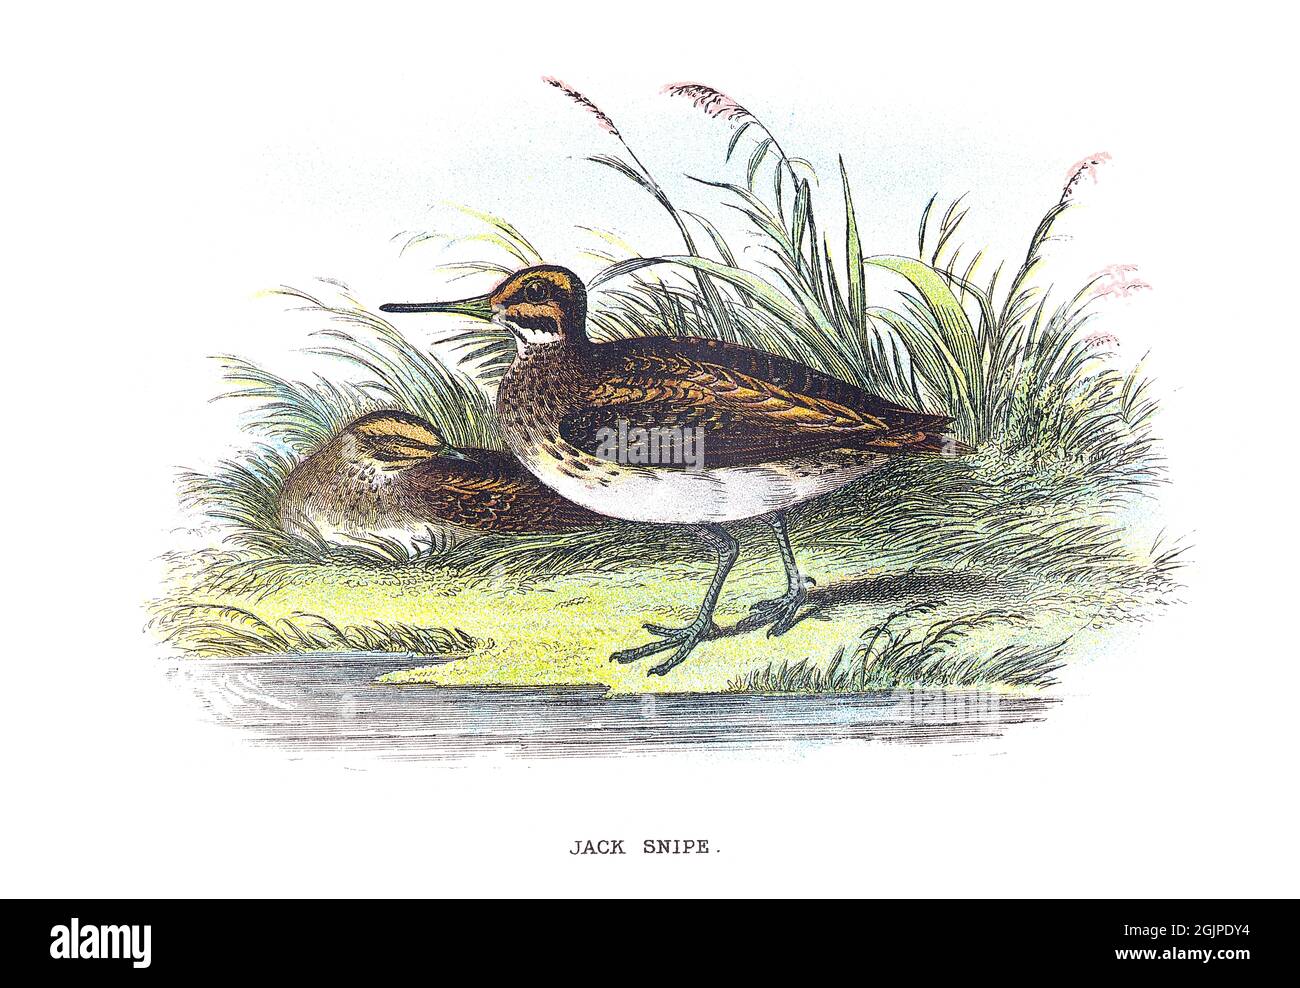 The jack snipe or jacksnipe, Lymnocryptes minimus, is a small stocky wader. It is the smallest snipe, and the only member of the genus Lymnocryptes. Stock Photo